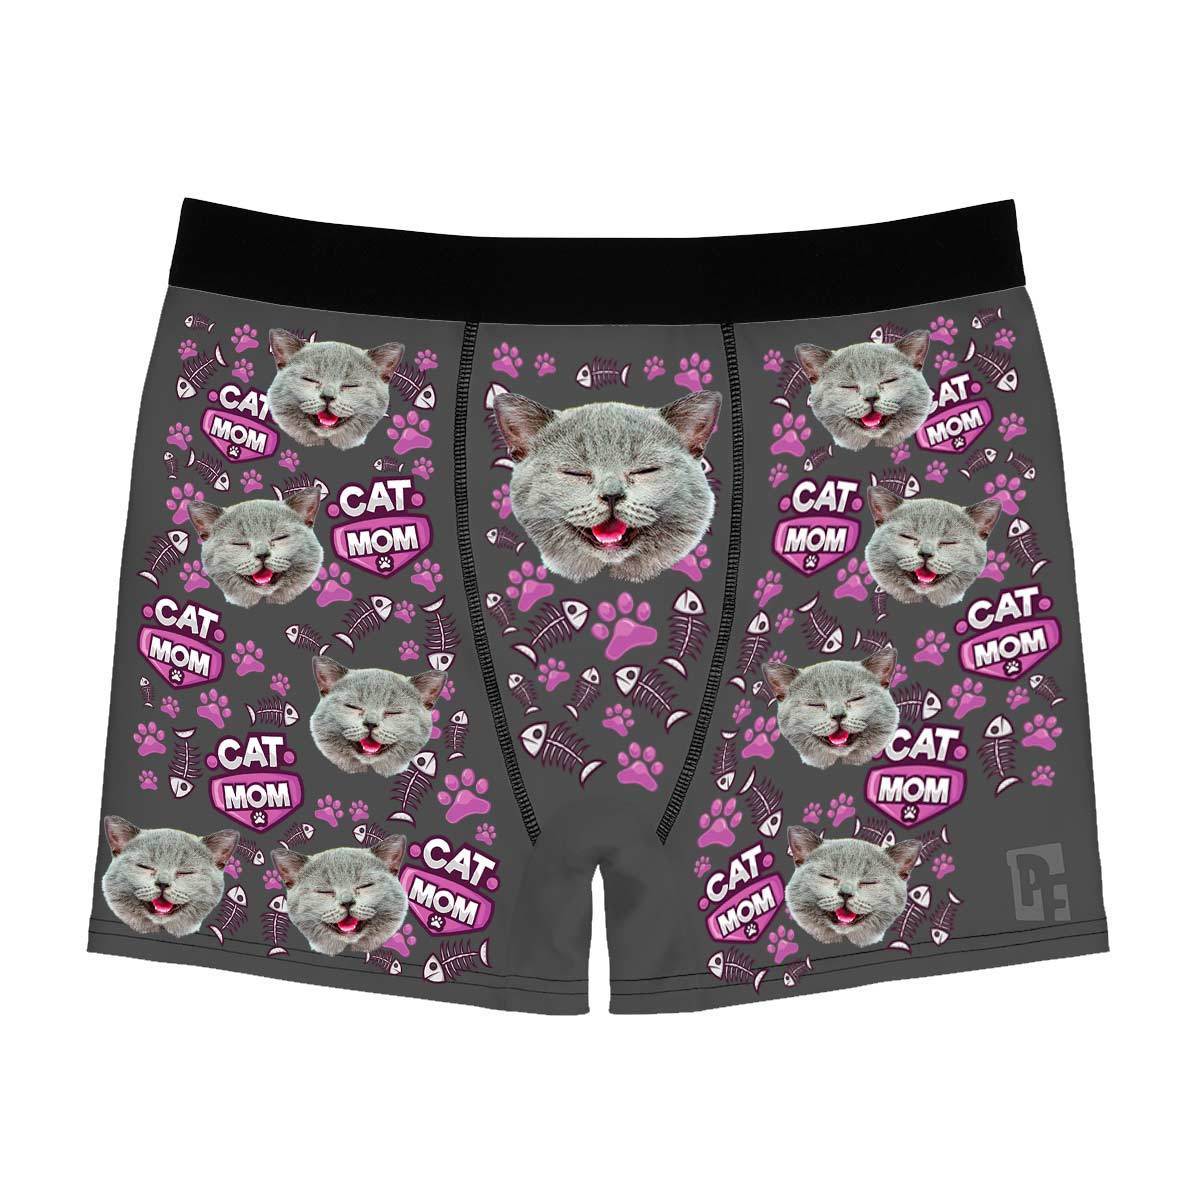 Dark Cat Mom men's boxer briefs personalized with photo printed on them